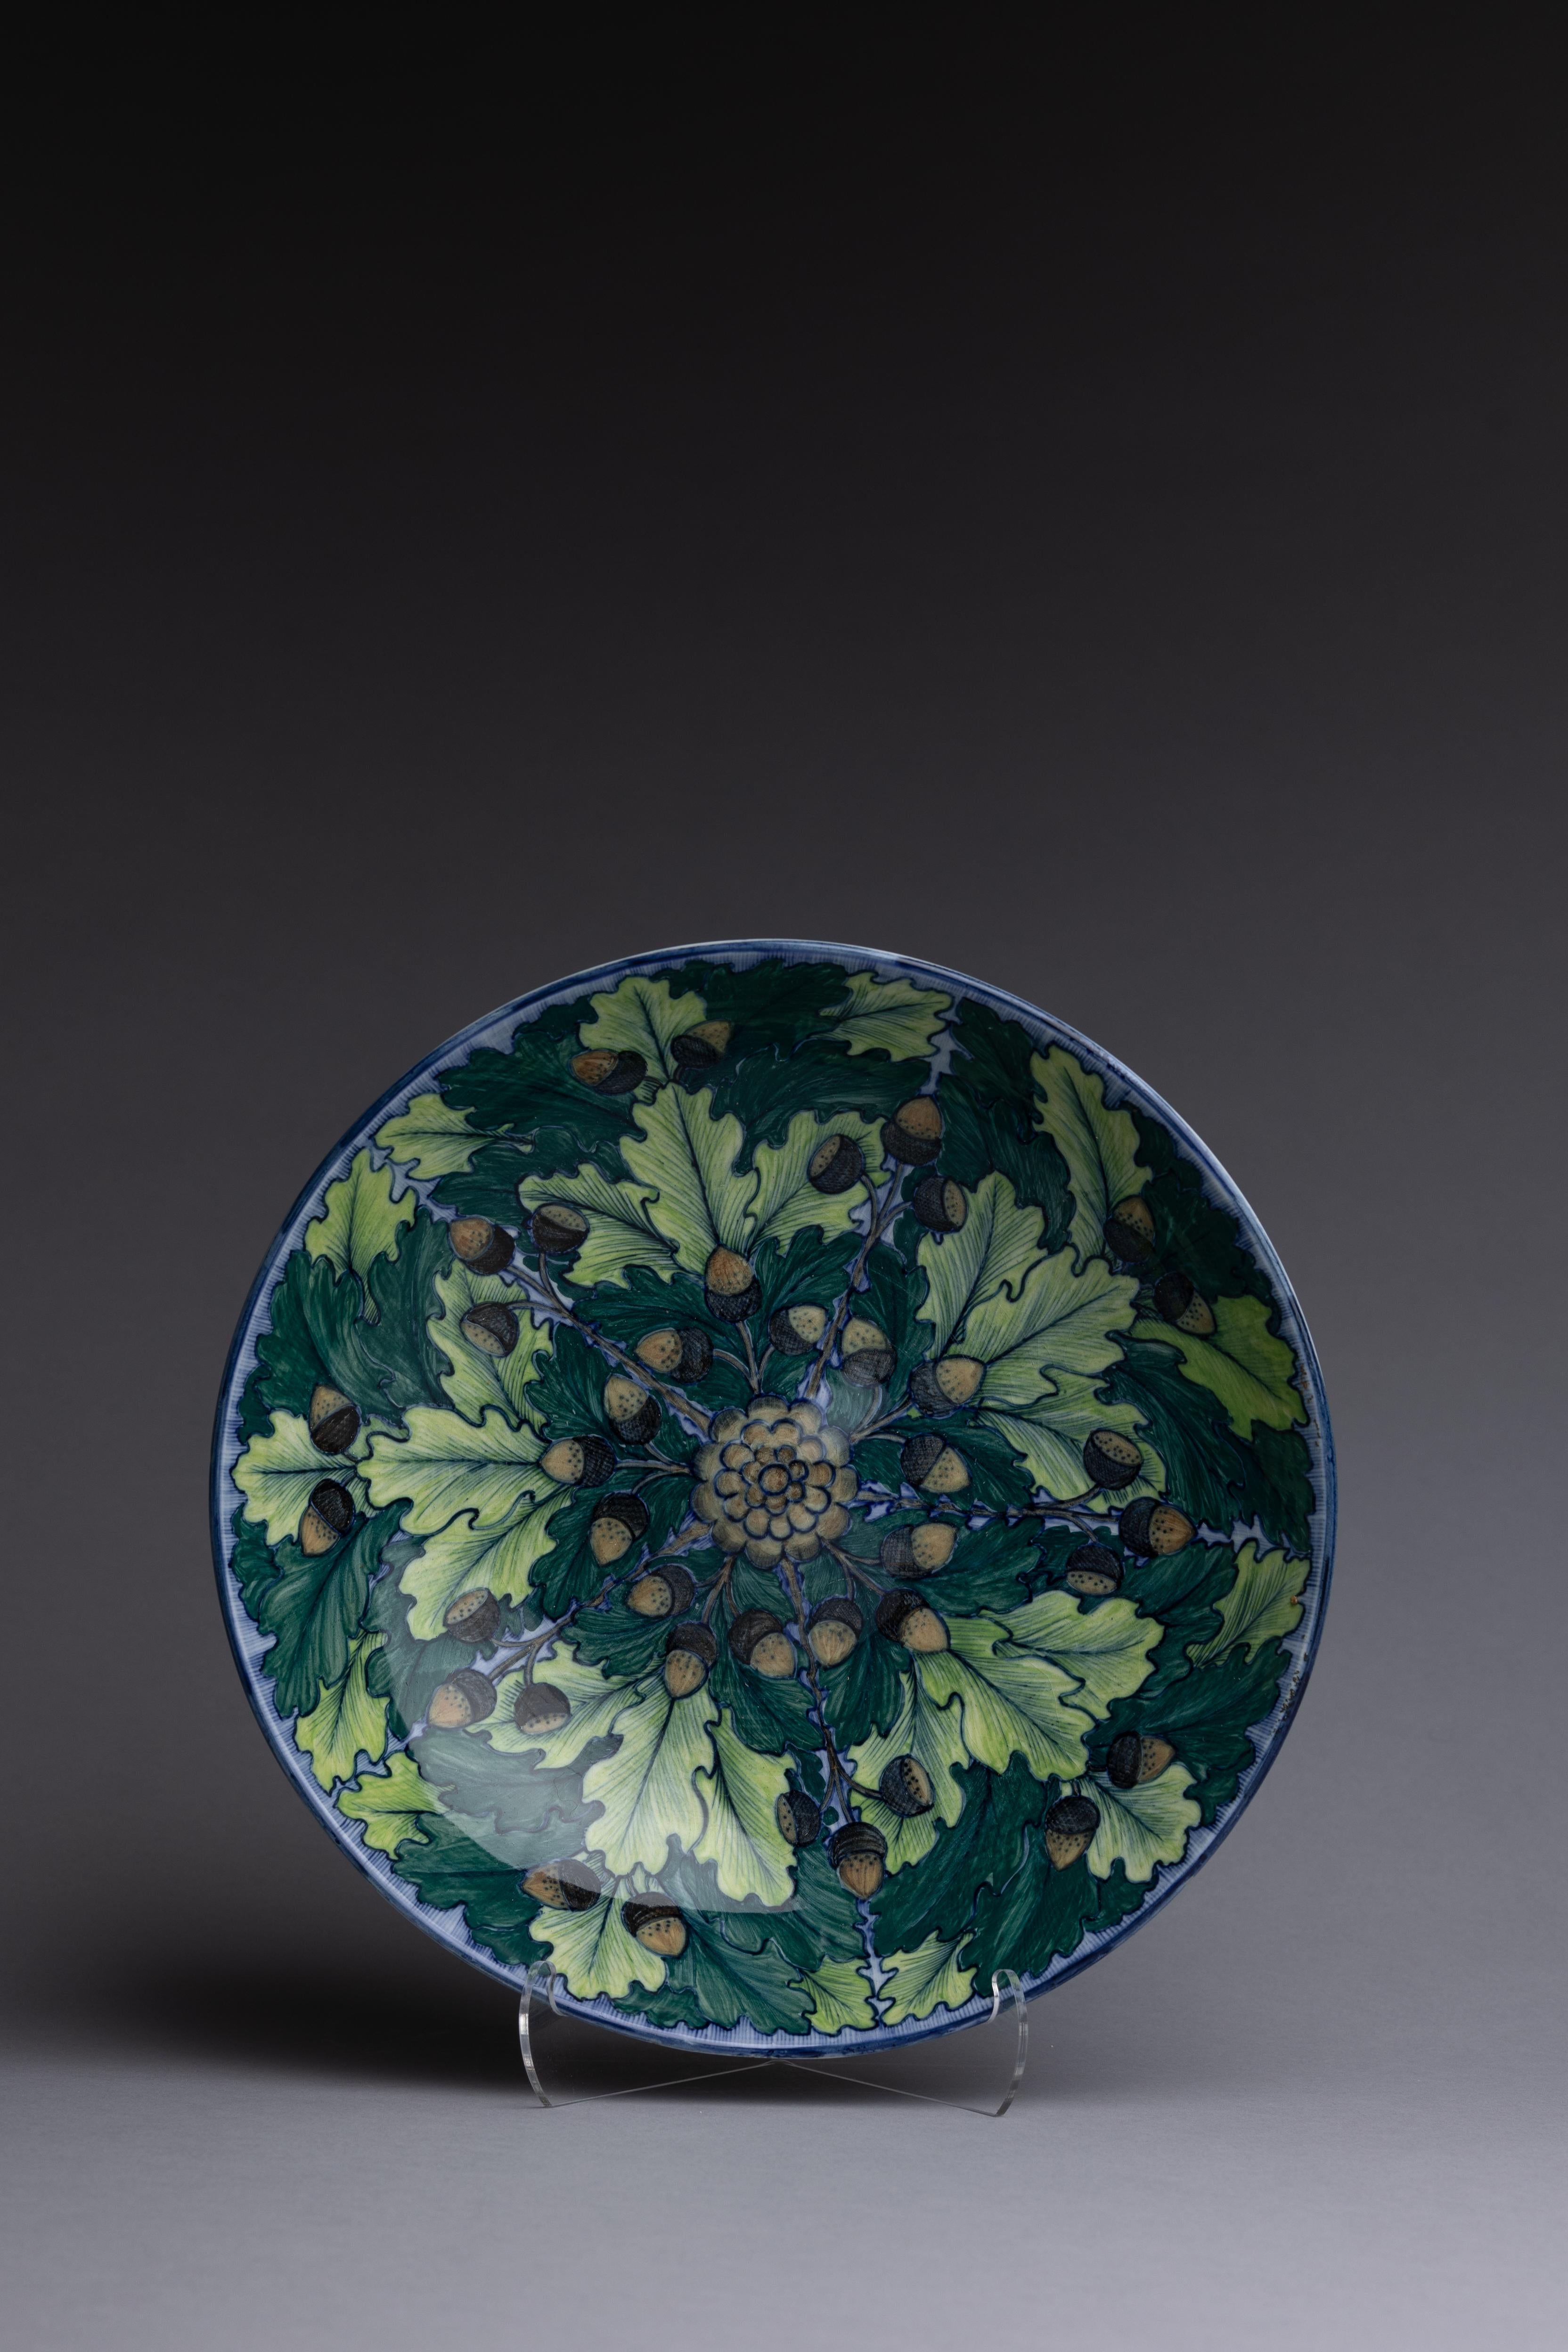 A shallow Wedgwood center bowl beautifully hand-painted with a mesmerizing design of oak leaves and acorns swirling around a pinecone at the center. The artist is unidentified but has signed the reverse 